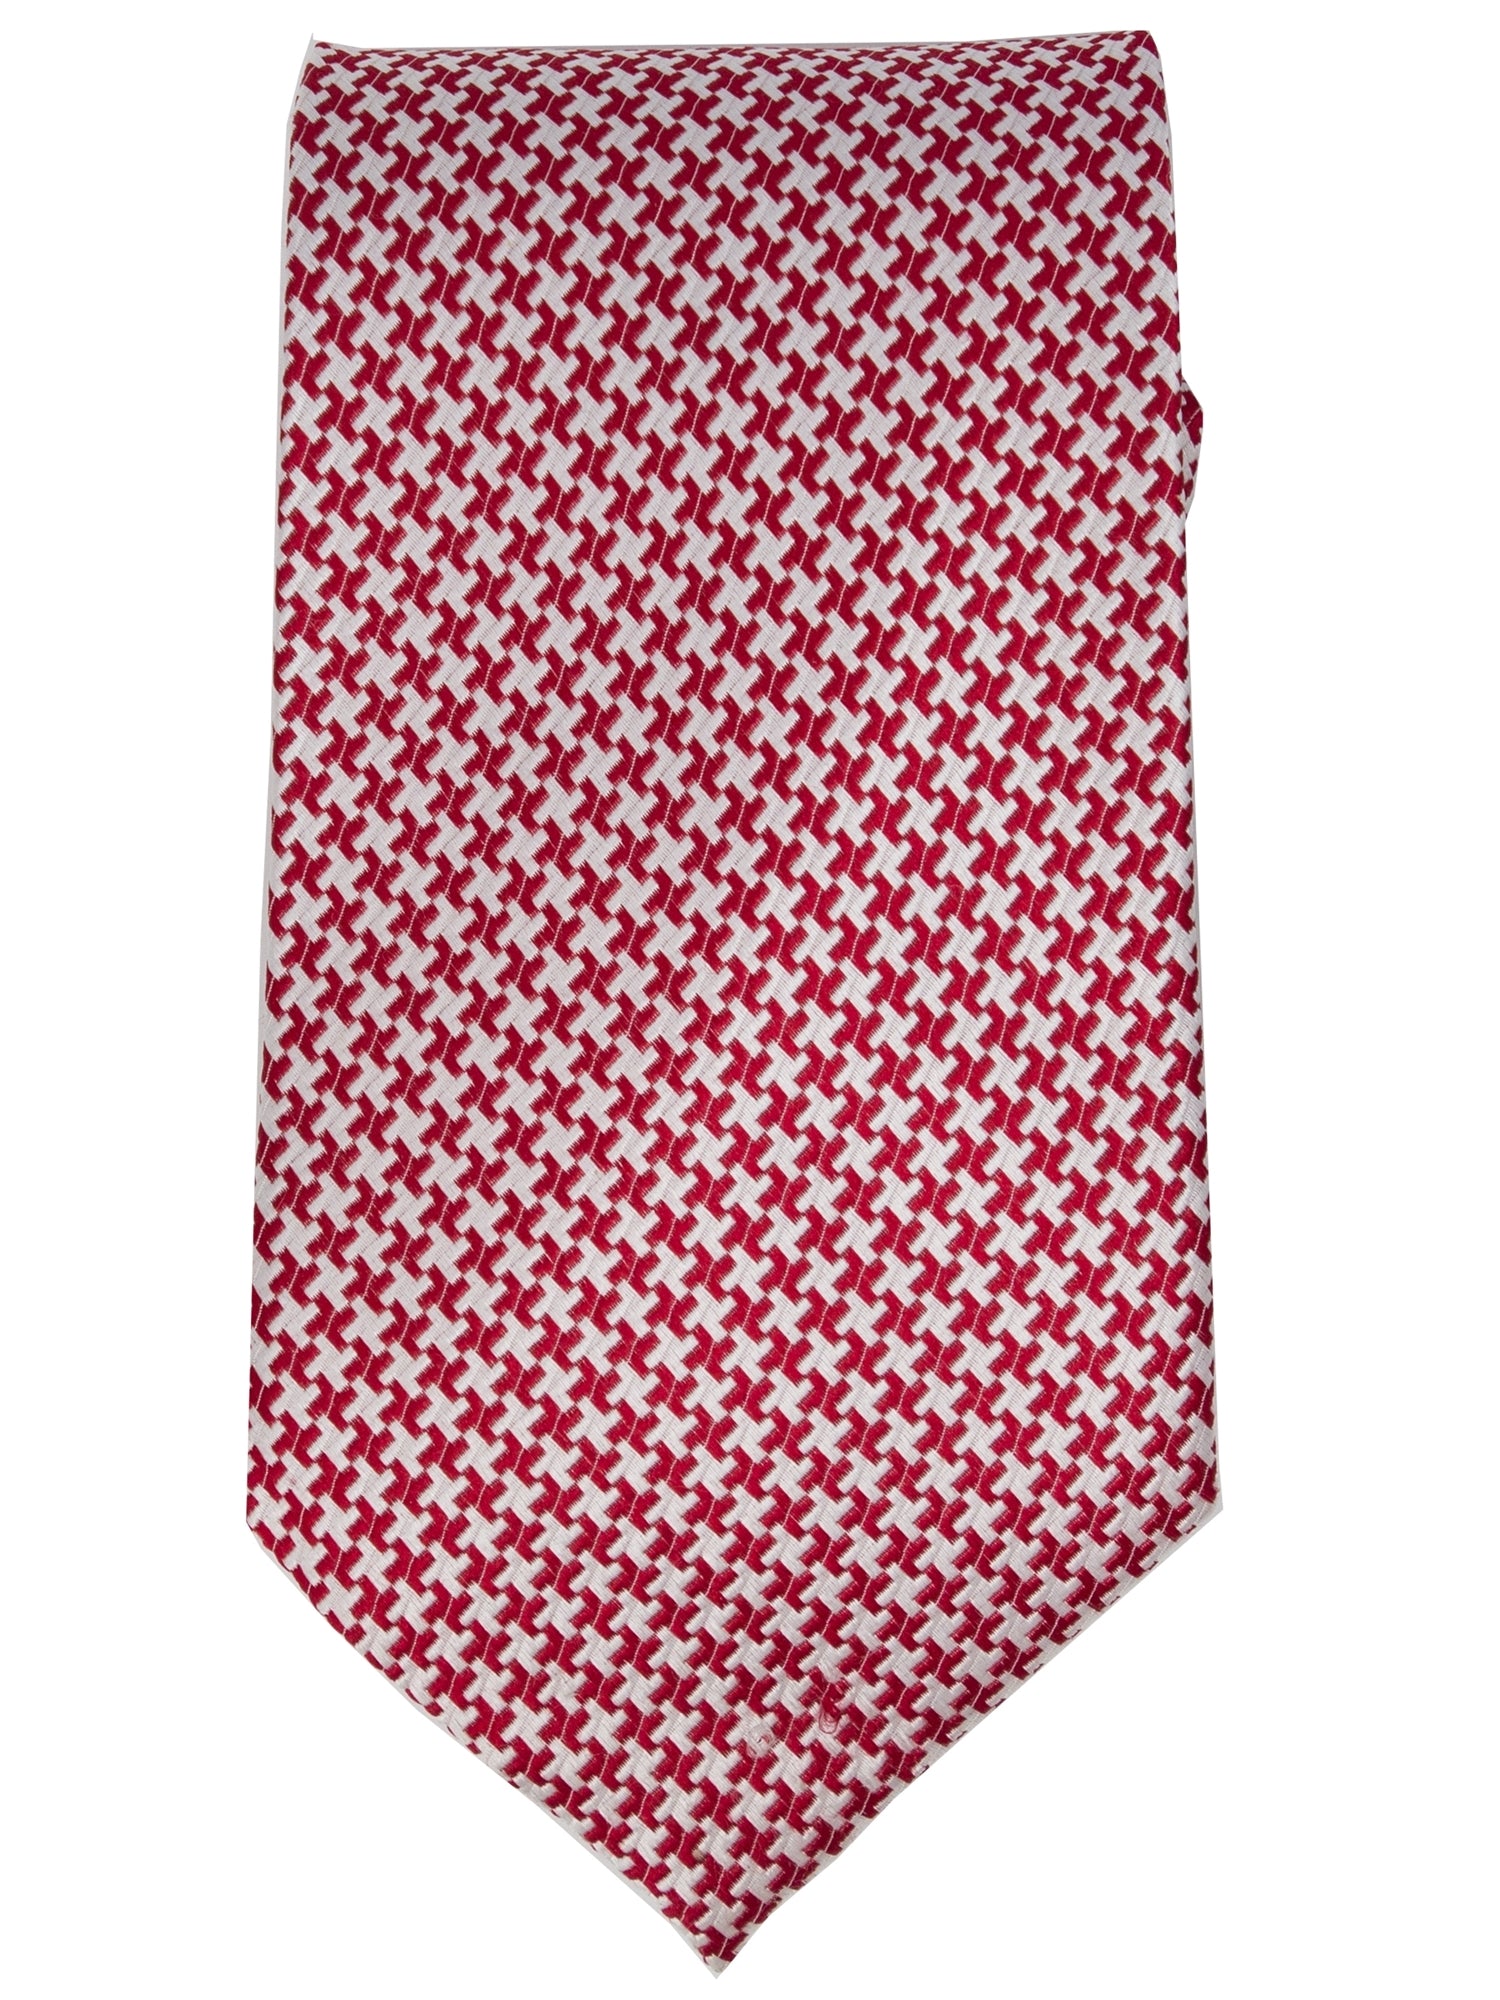 Men's Silk Woven Wedding Neck Tie Collection Neck Tie TheDapperTie Red And White Geometric Regular 